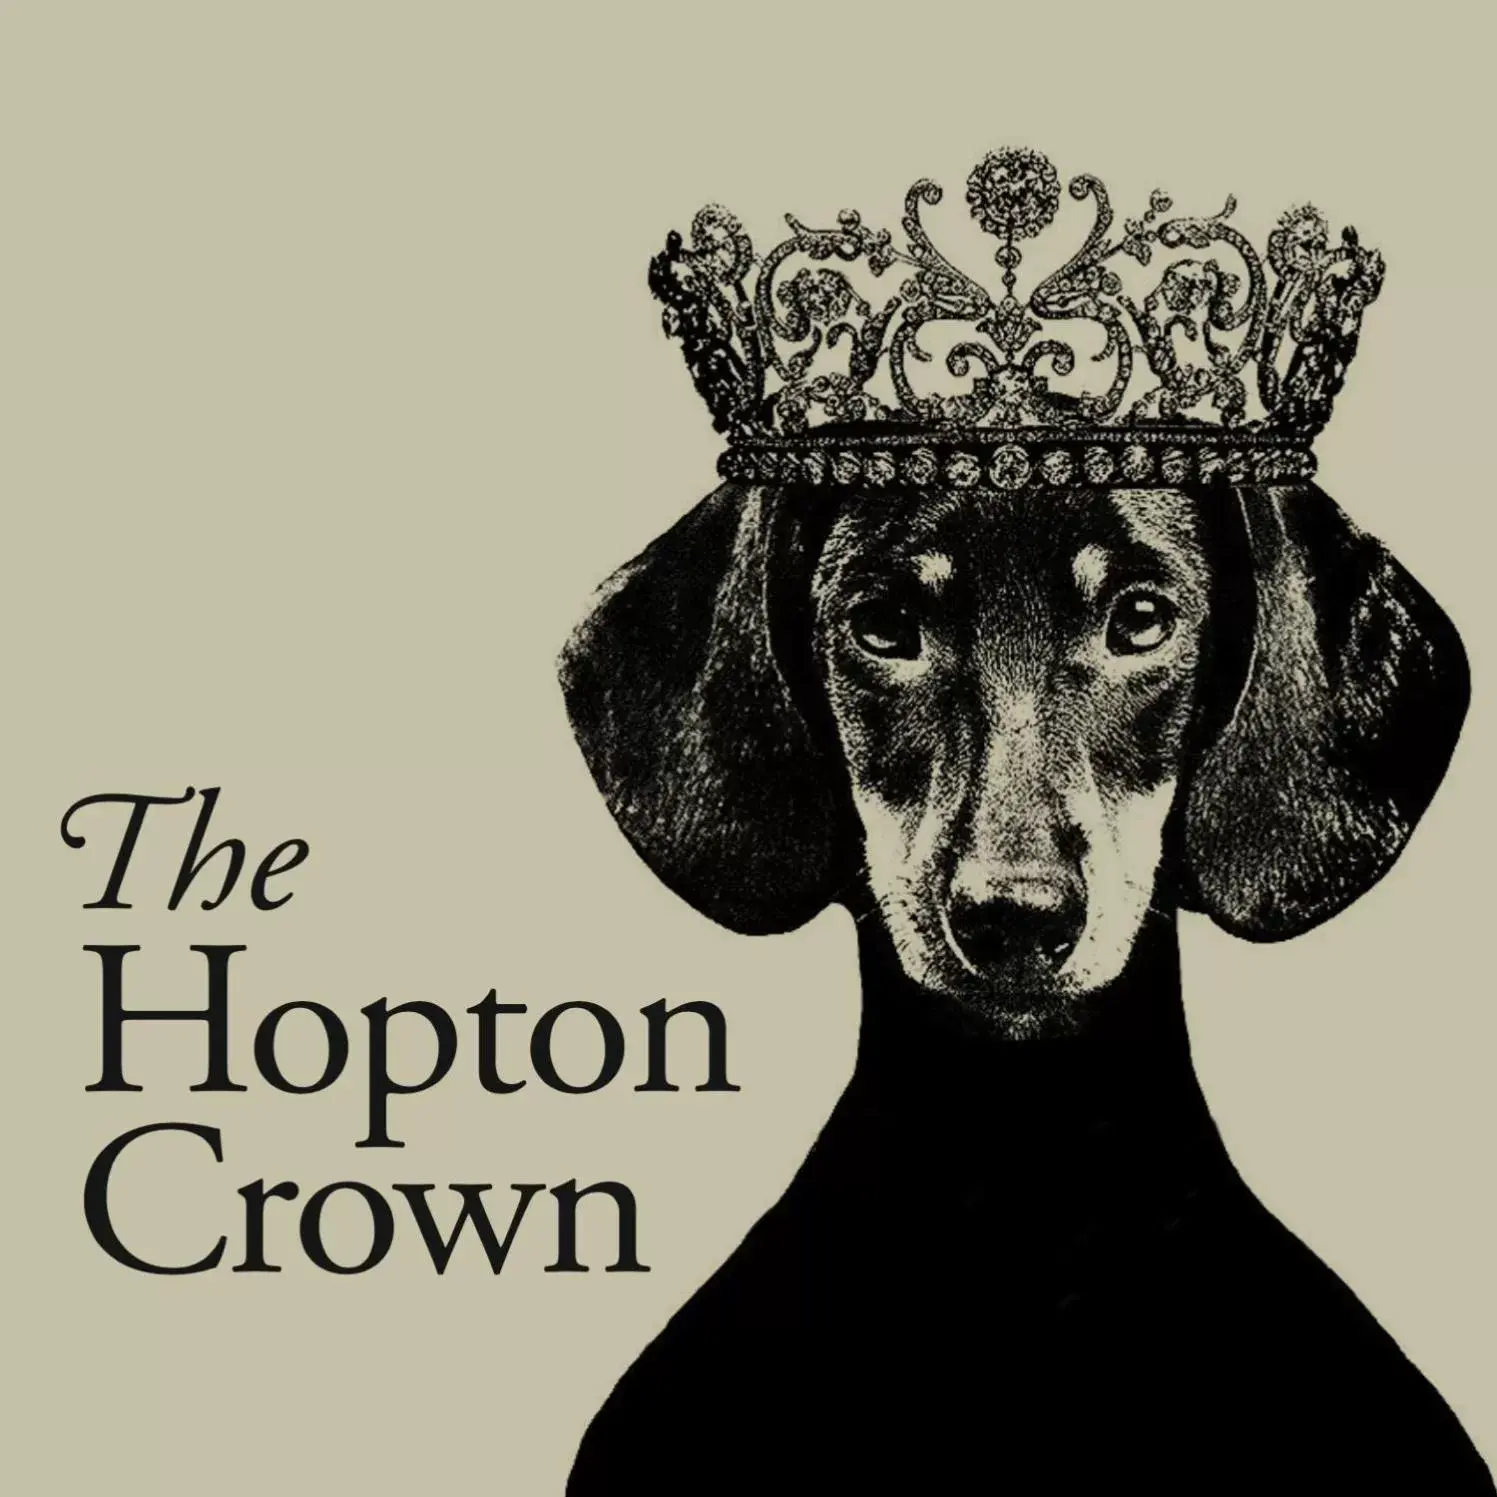 Pets in The Hopton Crown